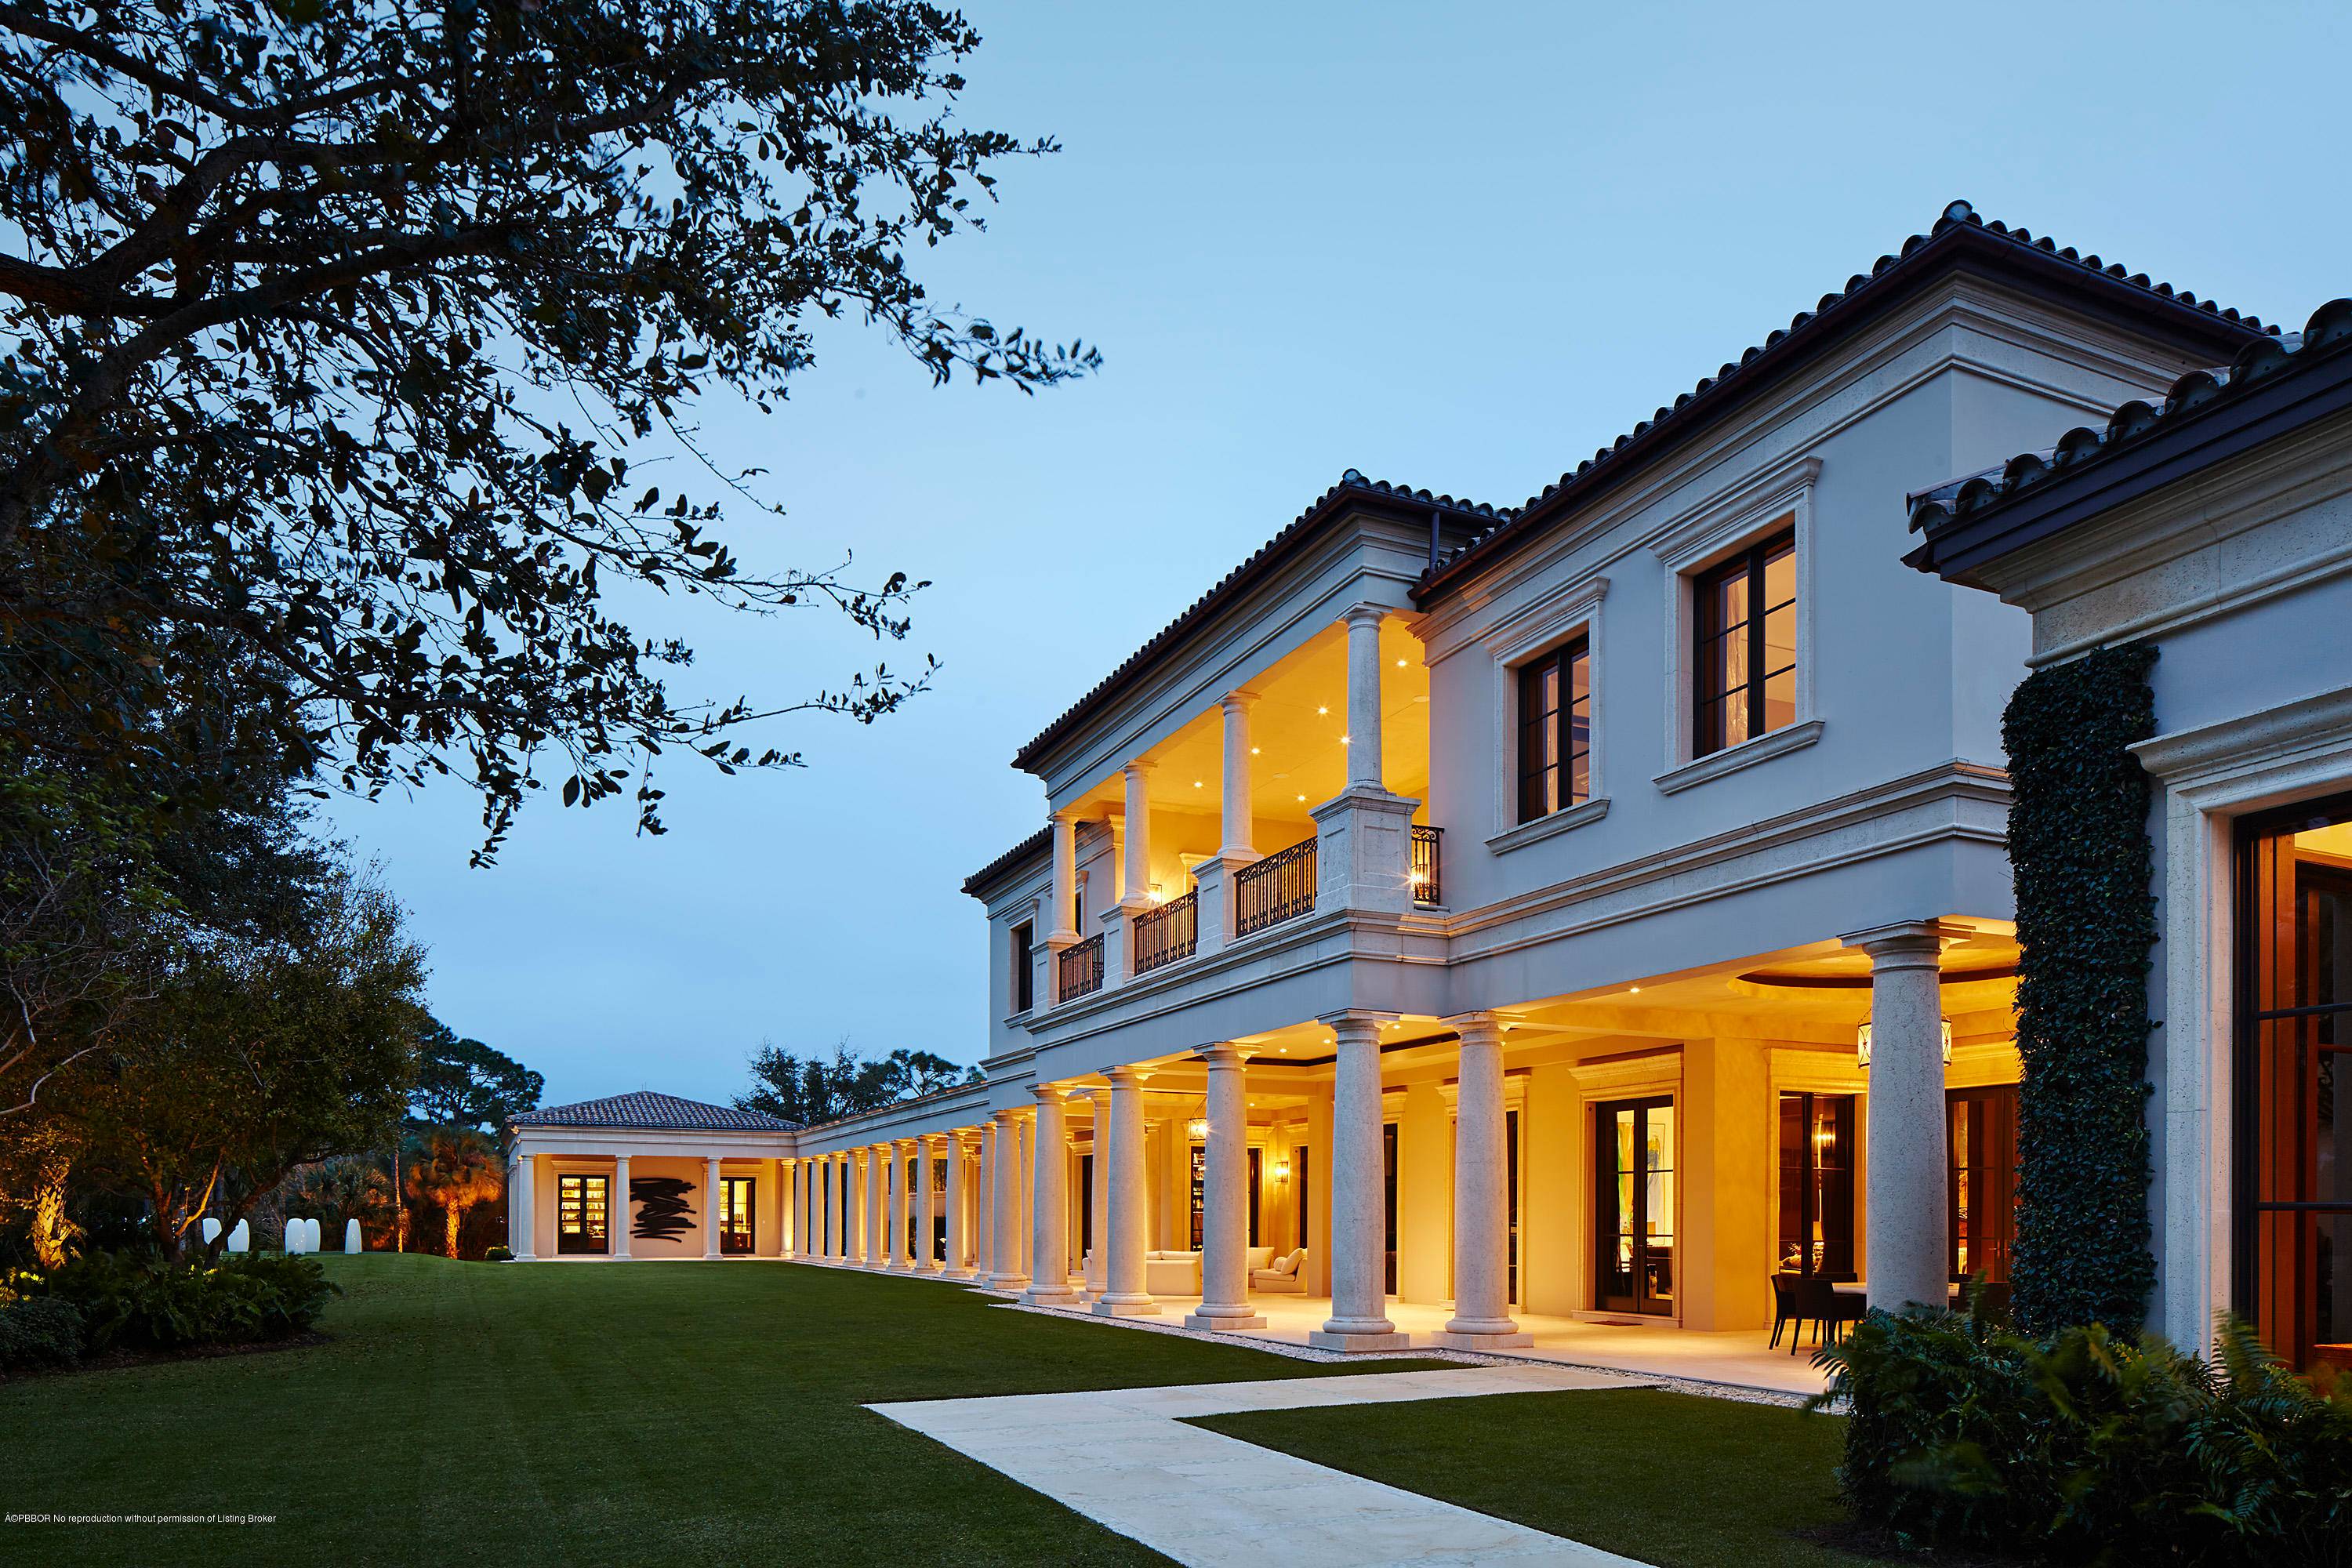 This exquisite Palladian style estate, previously featured in Architectural Digest, was designed by architect Manuel J.